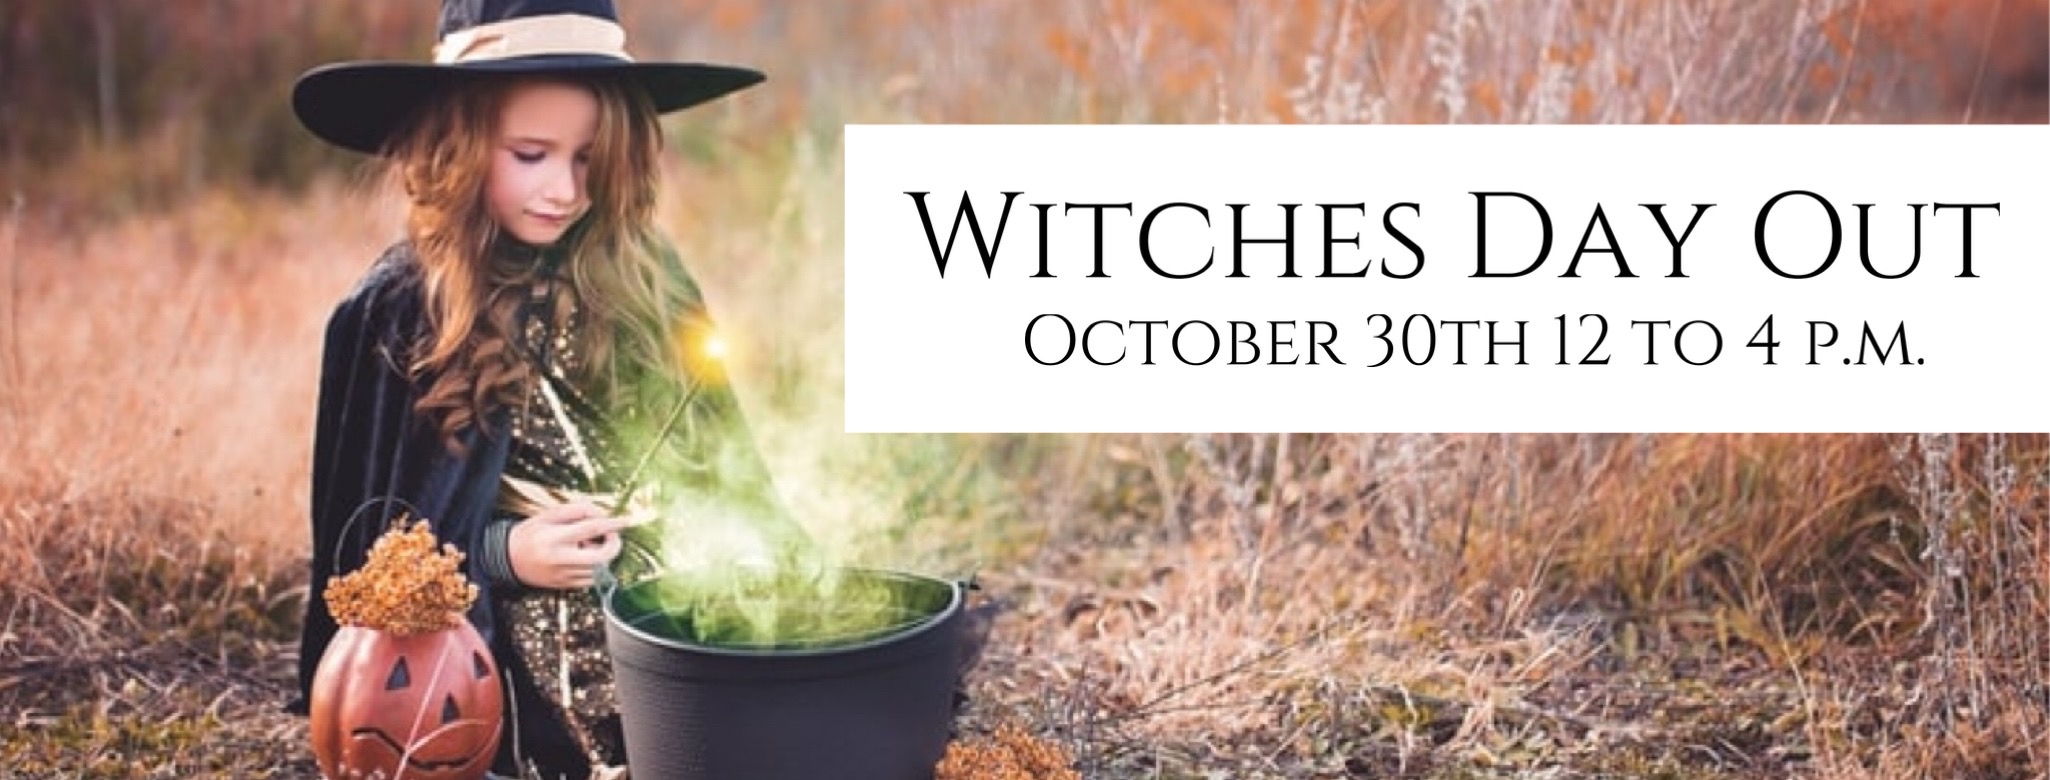 Witches Day Out